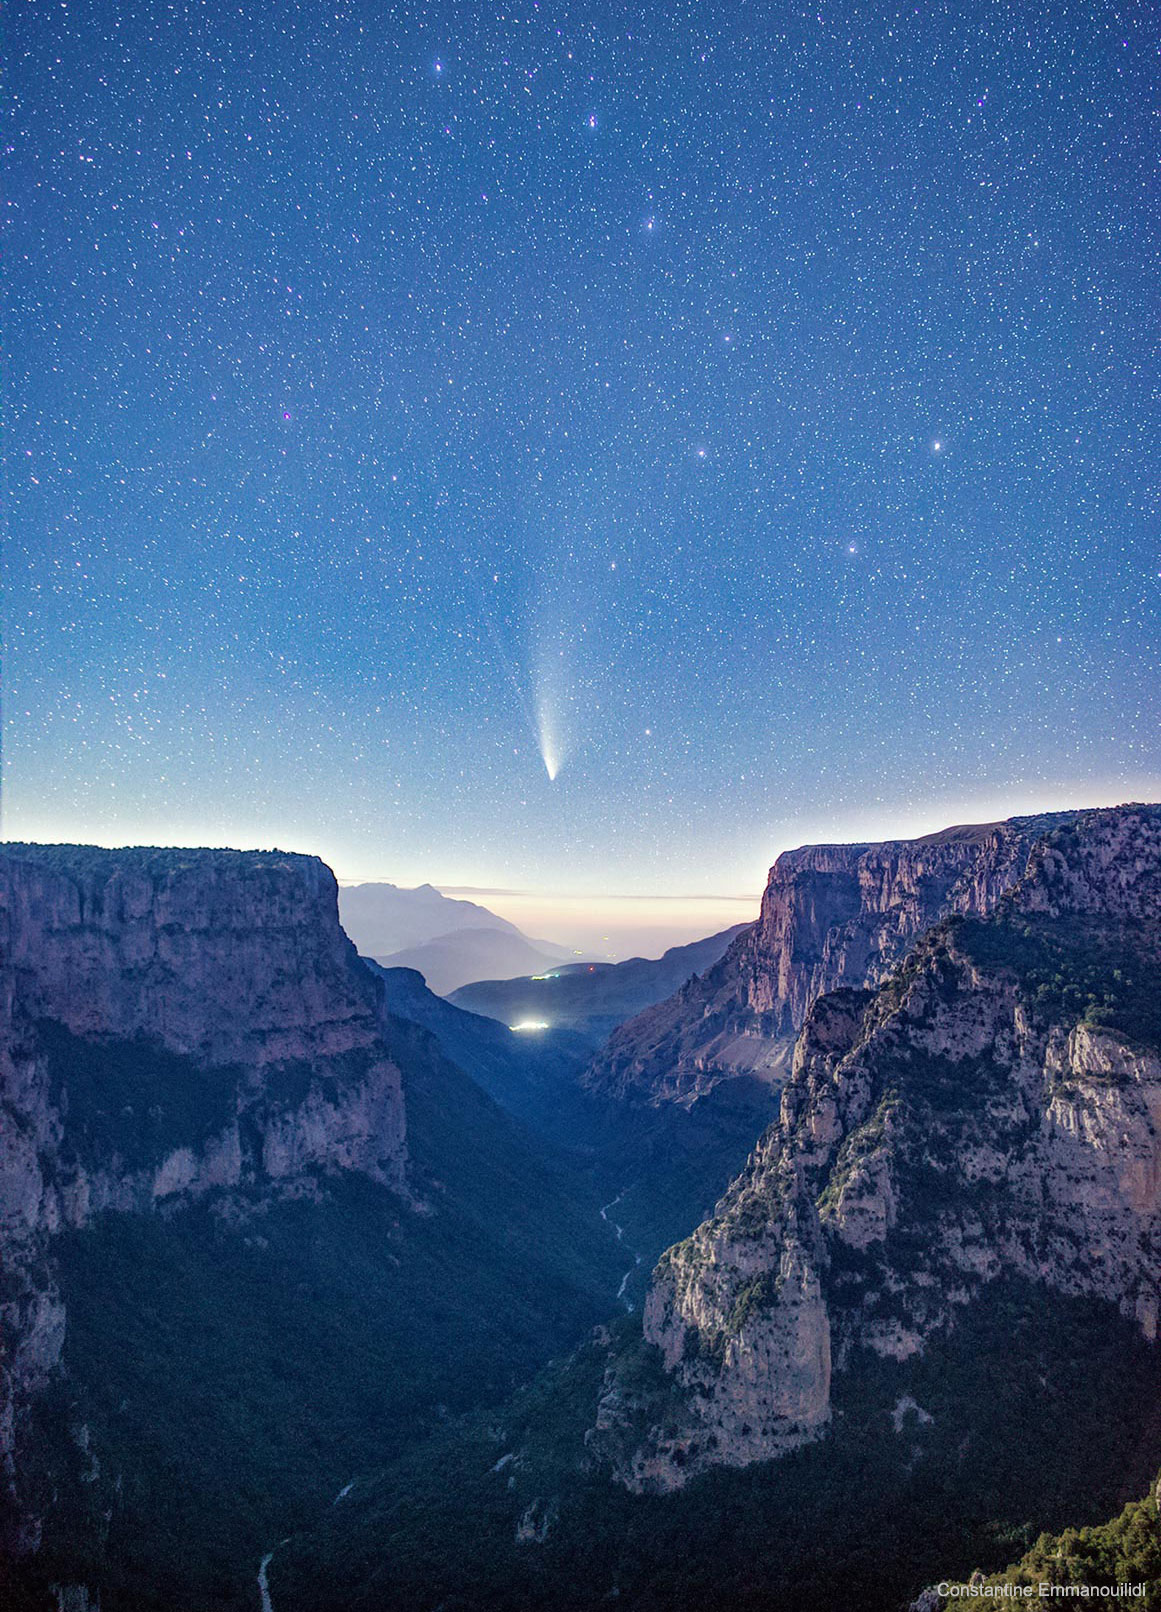 APOD: 2020 August 3  Comet NEOWISE over Vikos Gorge